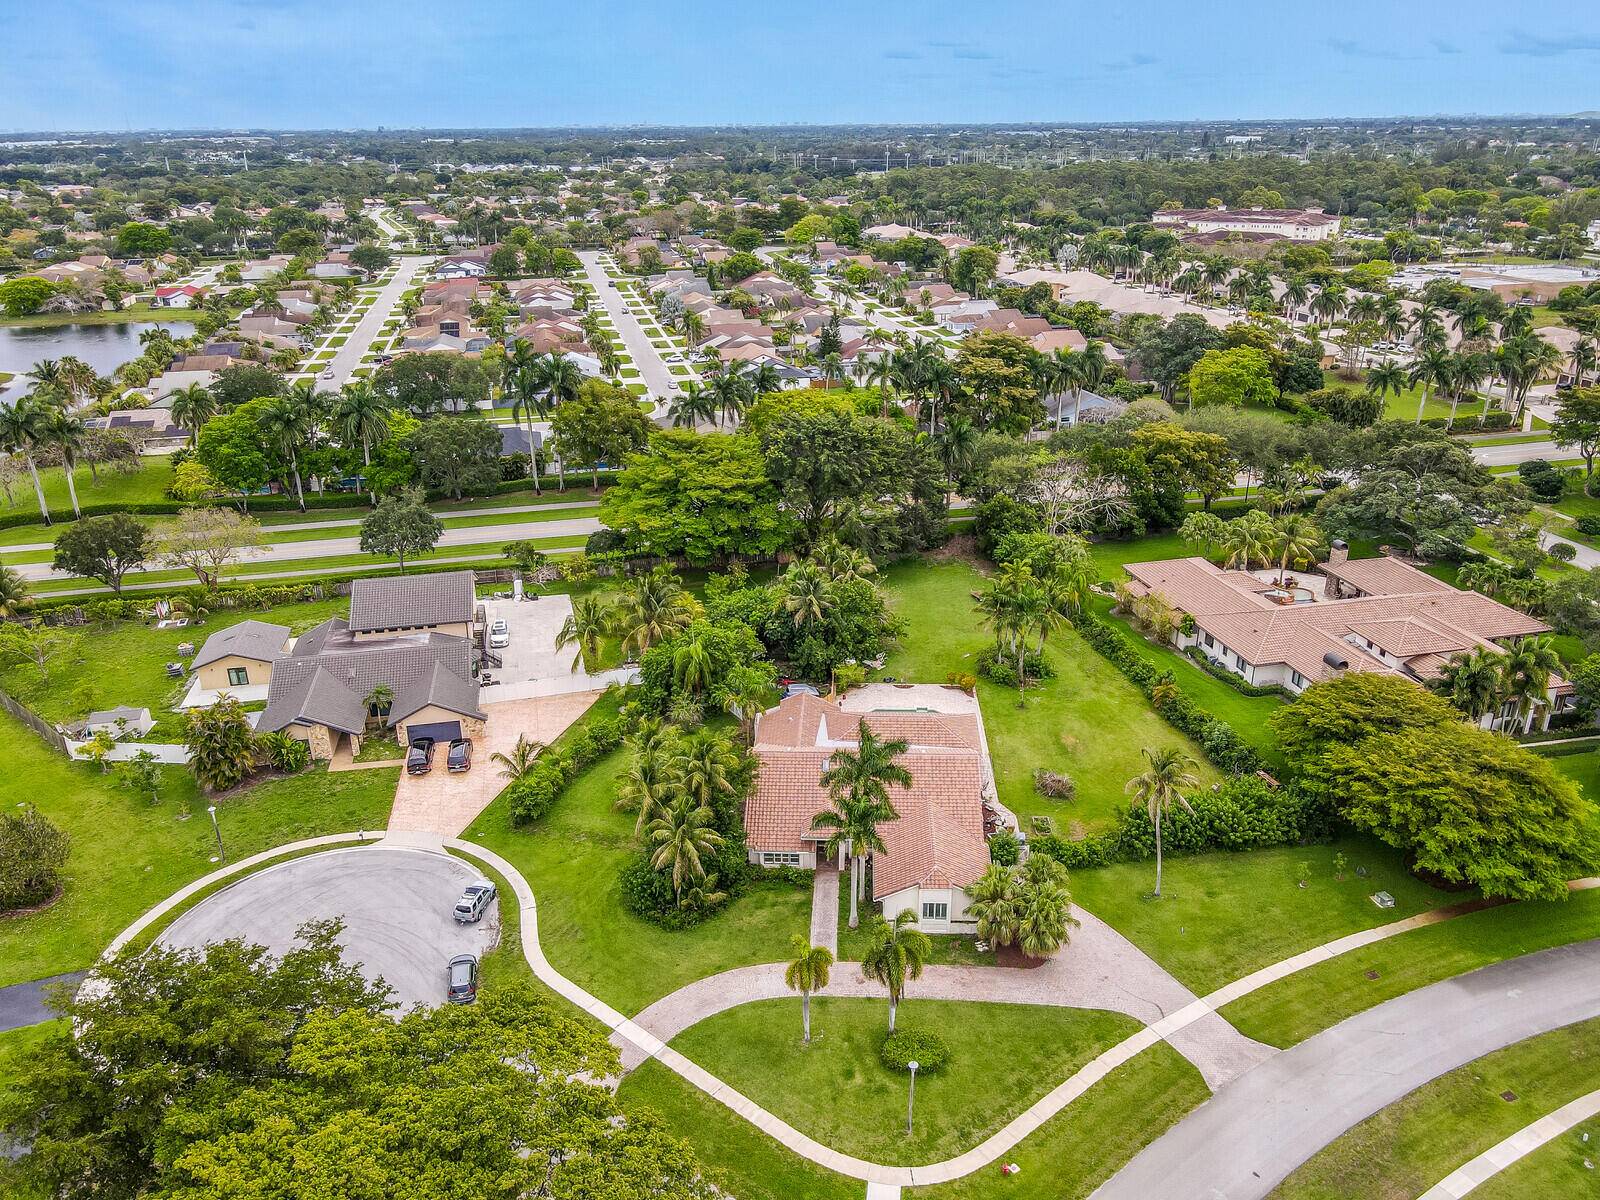 11808 Greystone Drive is an unparalleled gem nestled in the prestigious enclave of Winding Lakes II in Logger's Run, Boca Raton.